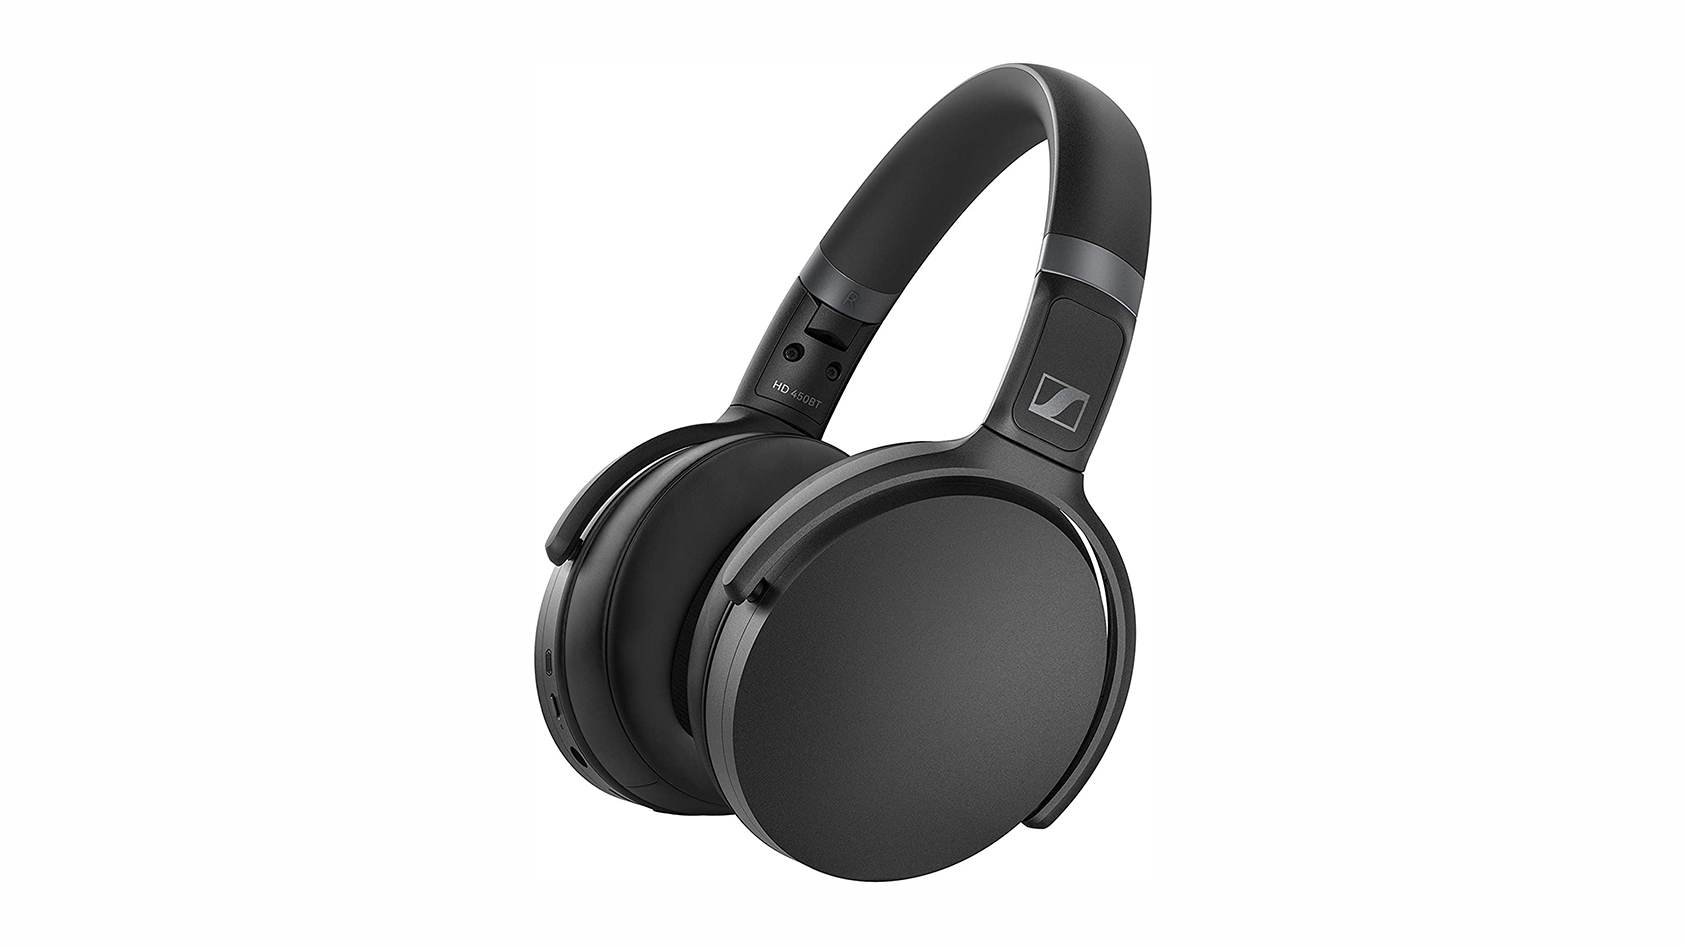 A product image of the Sennheiser HD 450BT noise canceling headphones in black against a white background.